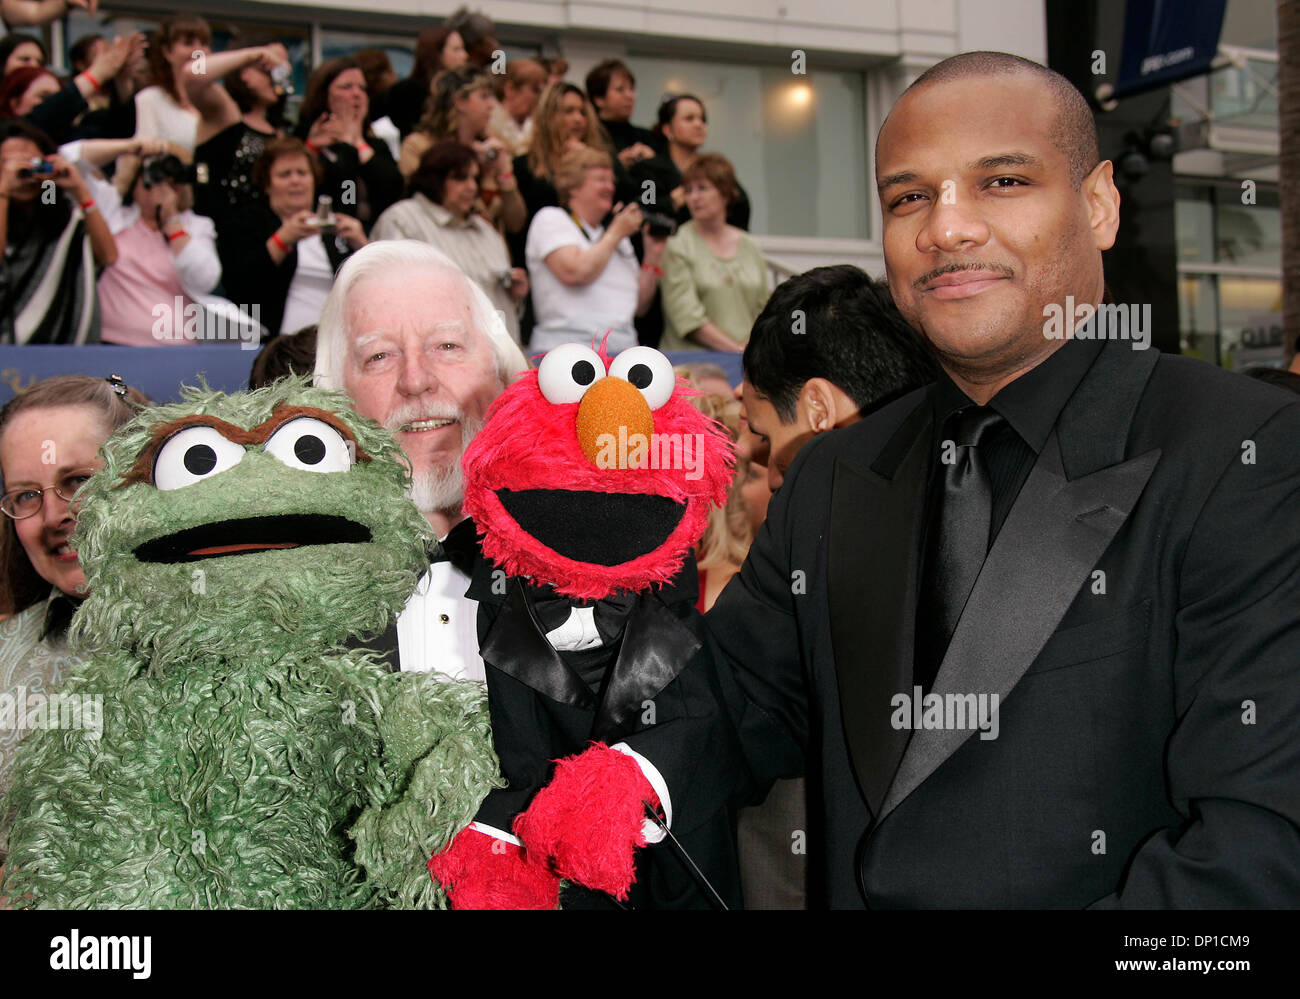 Apr 28, 2006; Hollywood, CA, USA; KEVIN CLASH, CARROLL & ELMO at the 2006 Daytime Emmy Awards held at the Kodak Theatre. Mandatory Credit: Photo by Lisa O'Connor/ZUMA Press. (©) Copyright 2006 by Lisa O'Connor Stock Photo